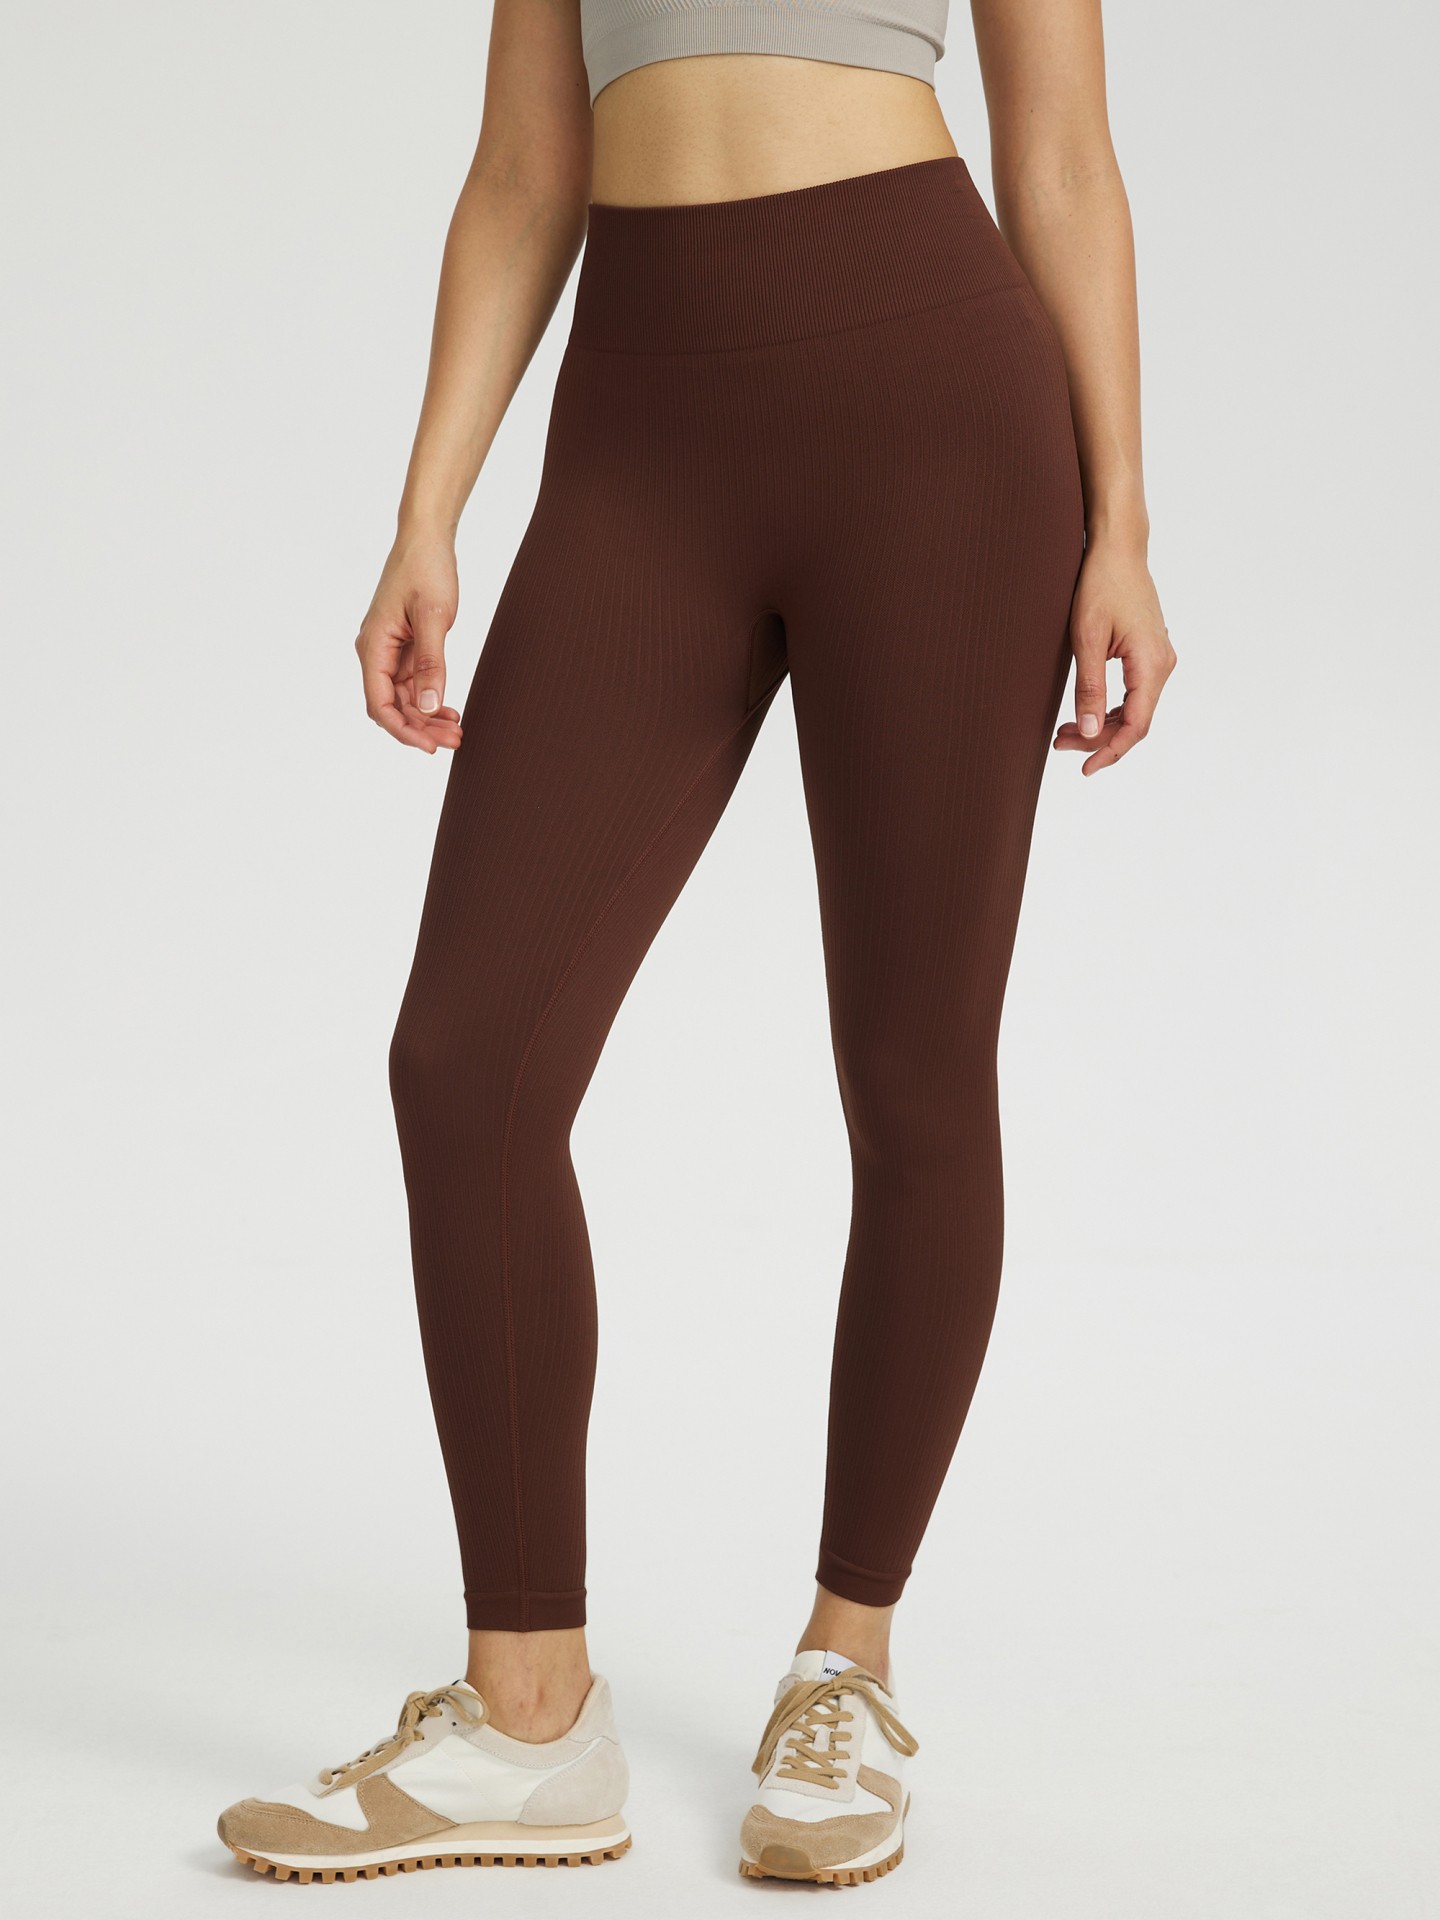 Sexy Legging, Gym Tights, Thermal Tights, High Waisted Leggings, Gym  Leggings, Sexy Tights, Brown Tights, From Premium_fashion, $19.1